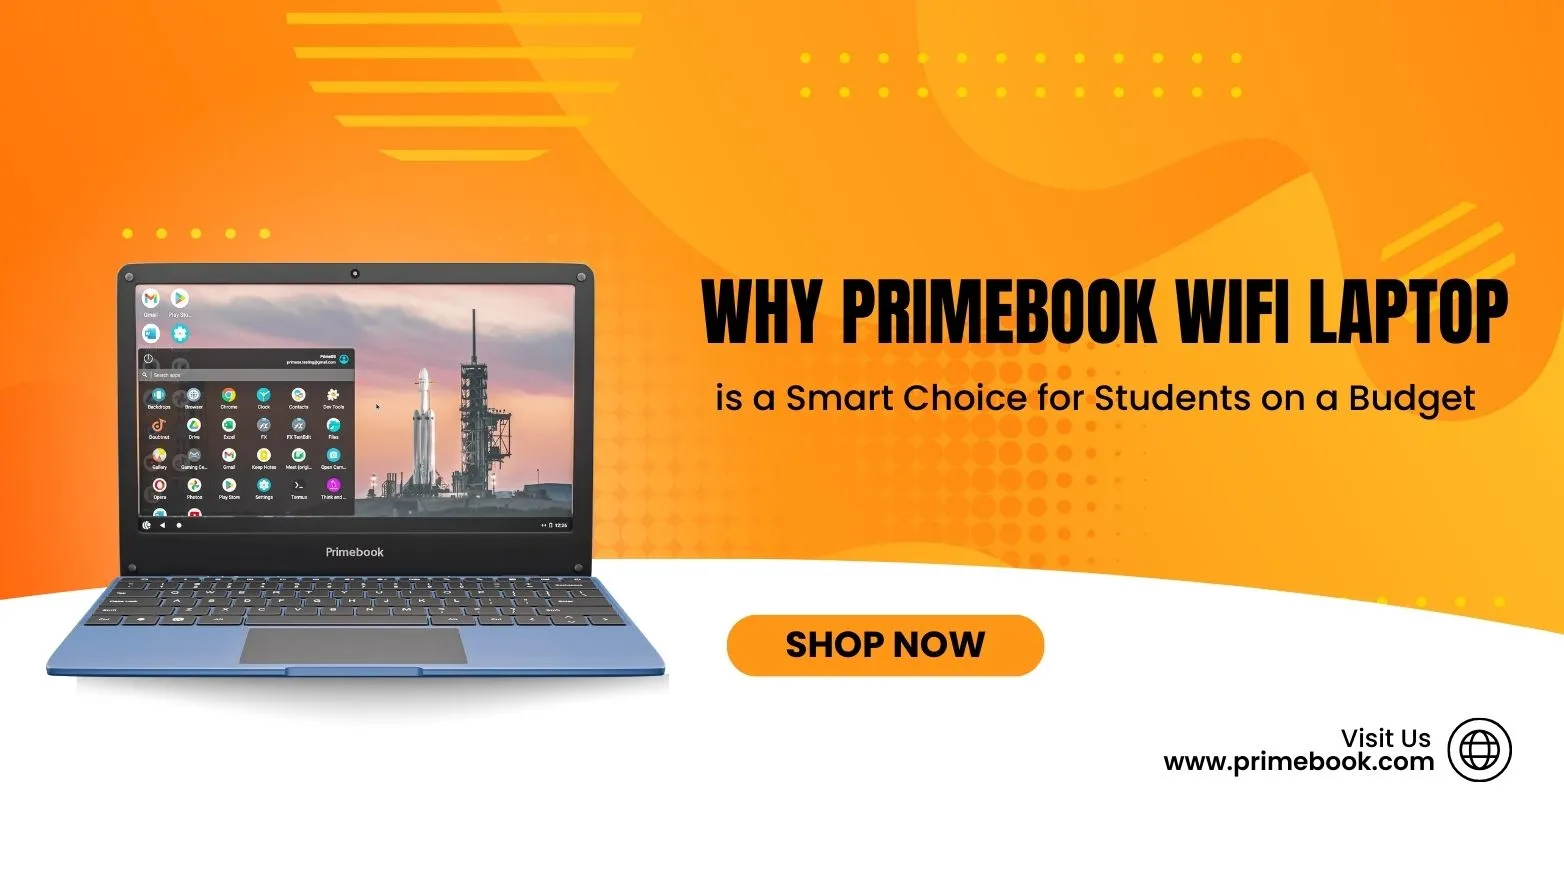 Tech Tips and Tricks Why Primebook WiFi Laptop is a Smart Choice for Students on a Budget